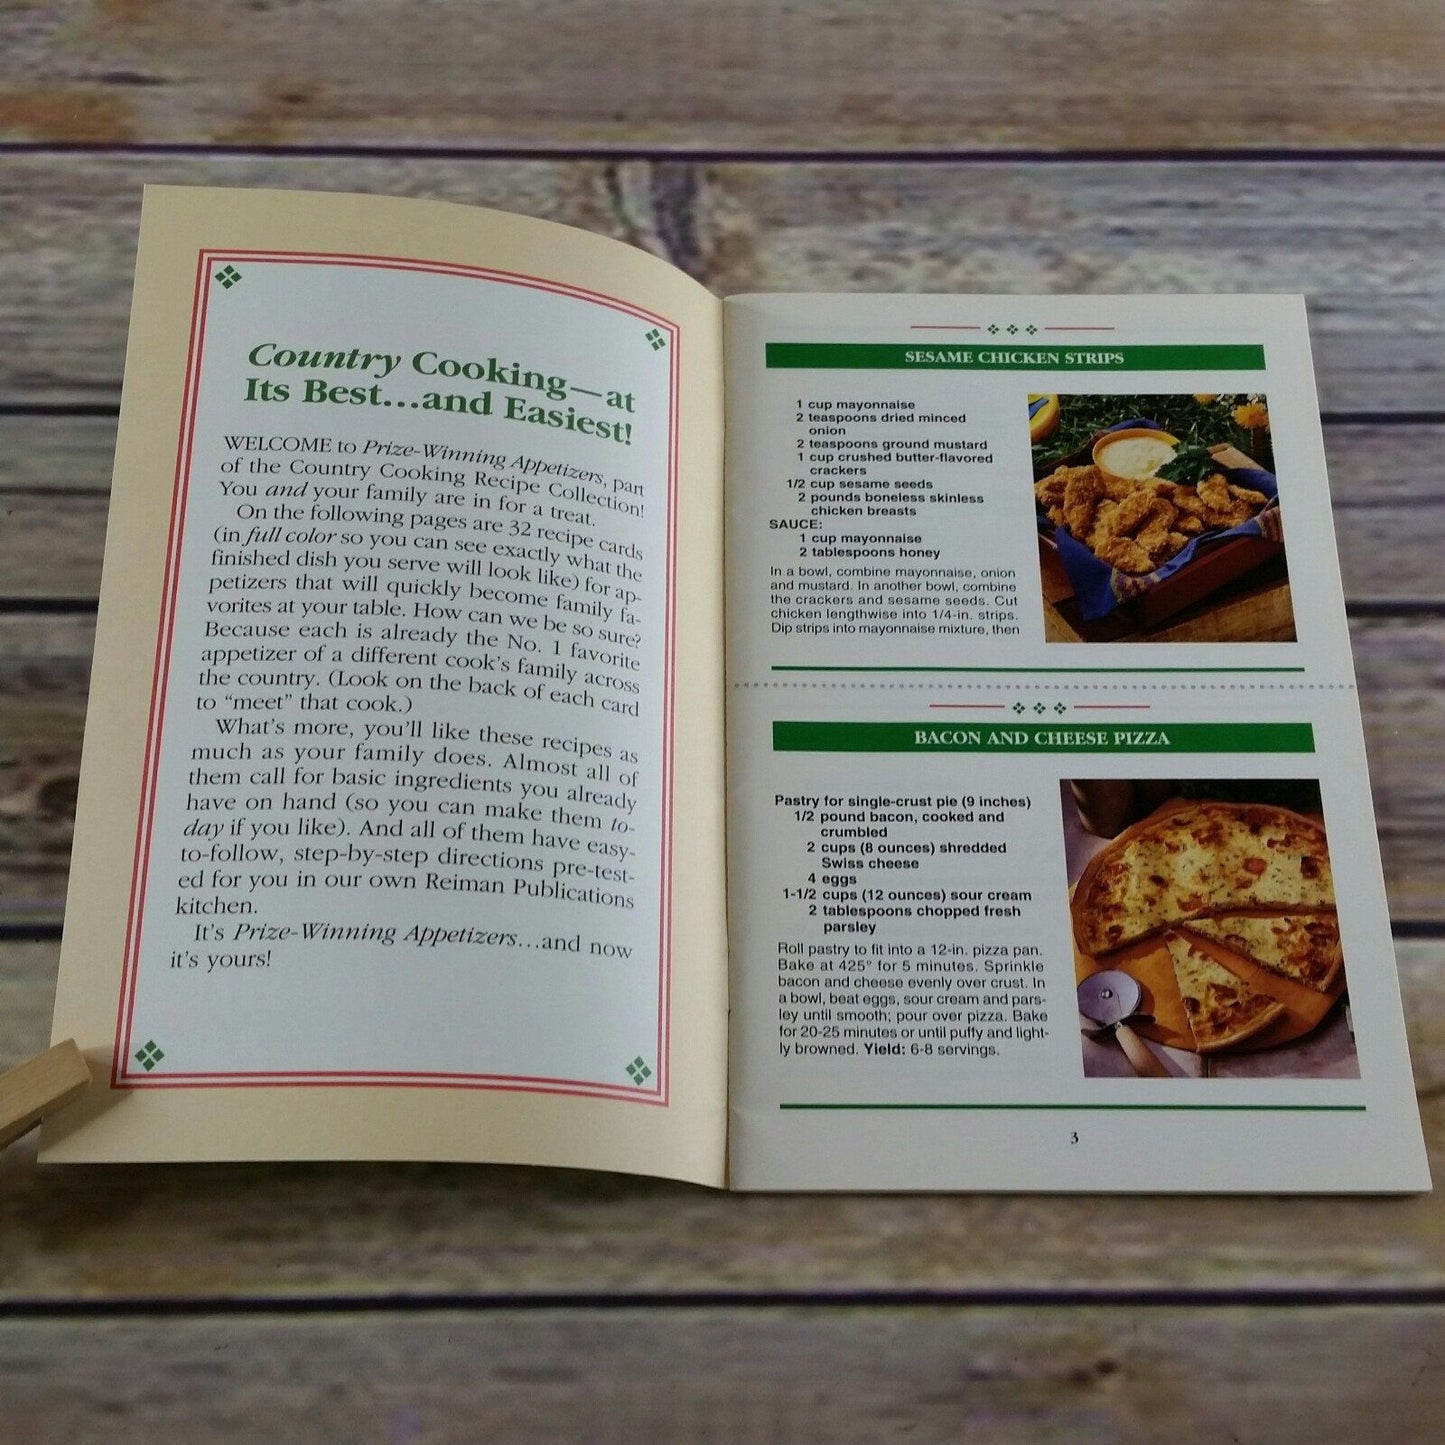 Prize Winning Appetizers The Country Cooking Recipe Collection Pamphlet Grocery Store Booklet 1999